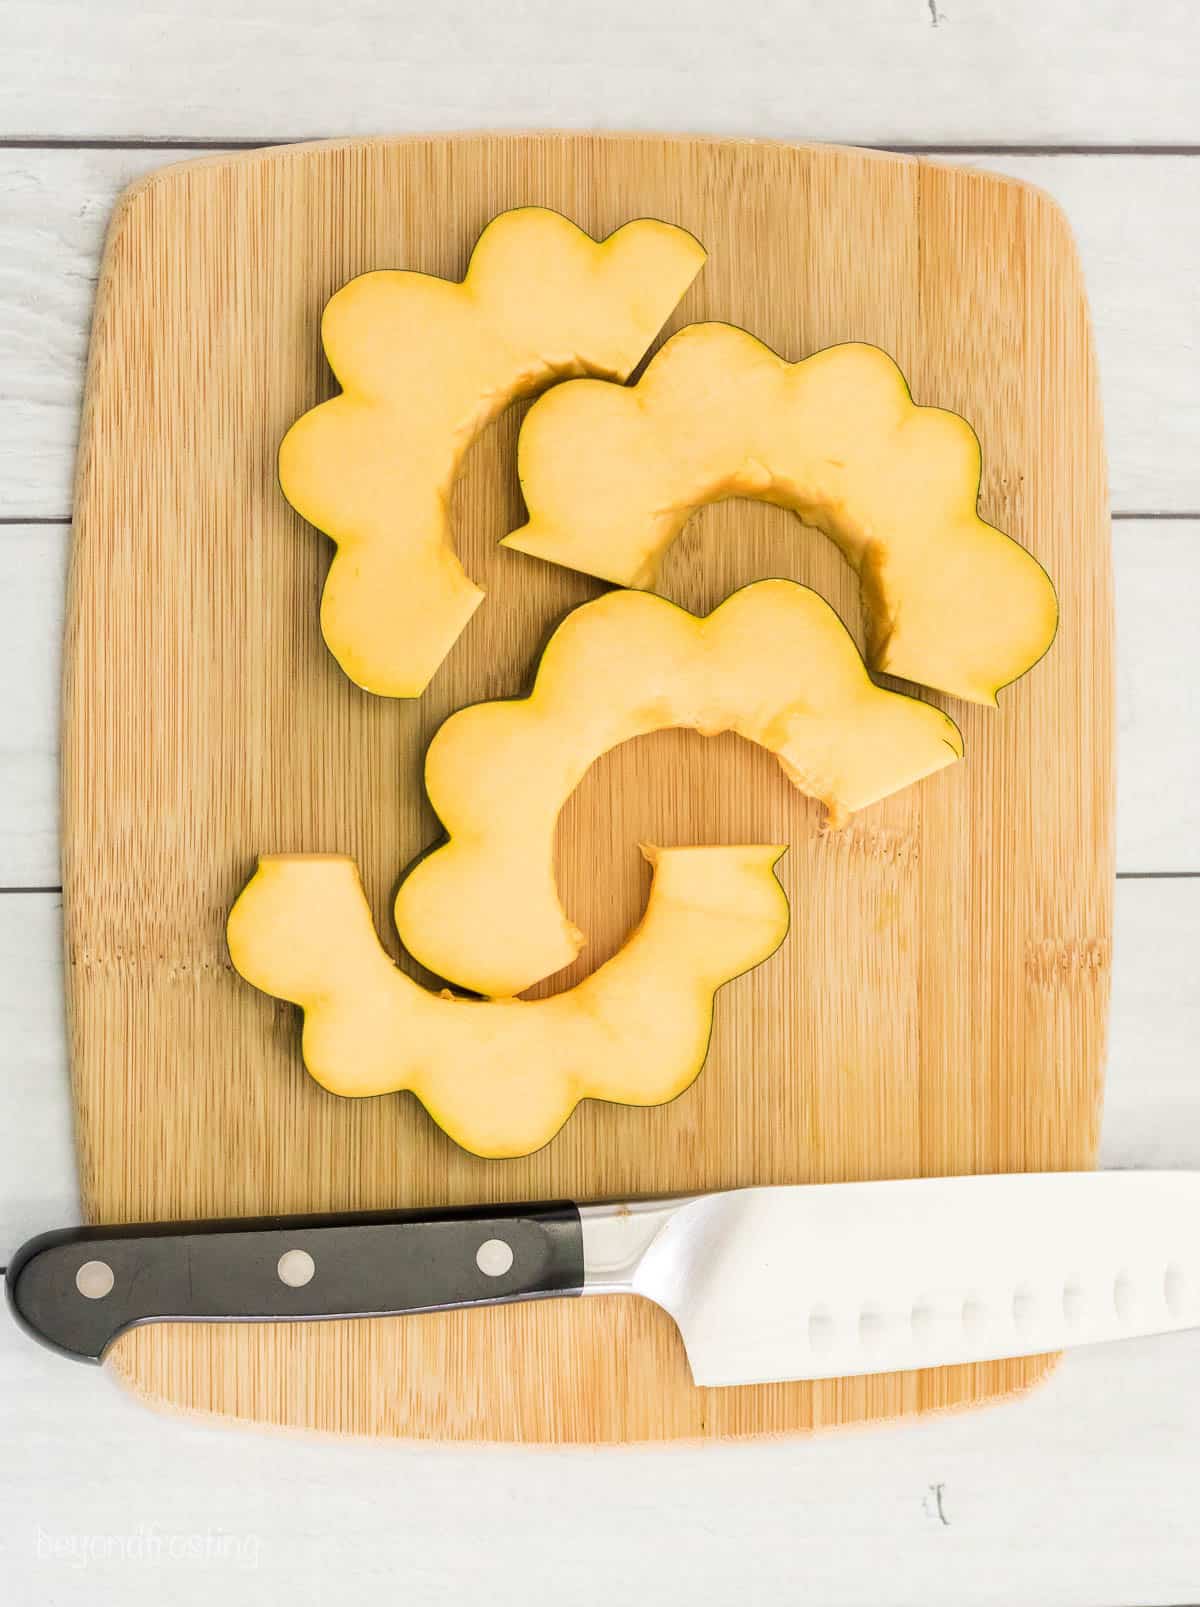 Four squash slices on a wooden cutting board with a sharp chef's knife